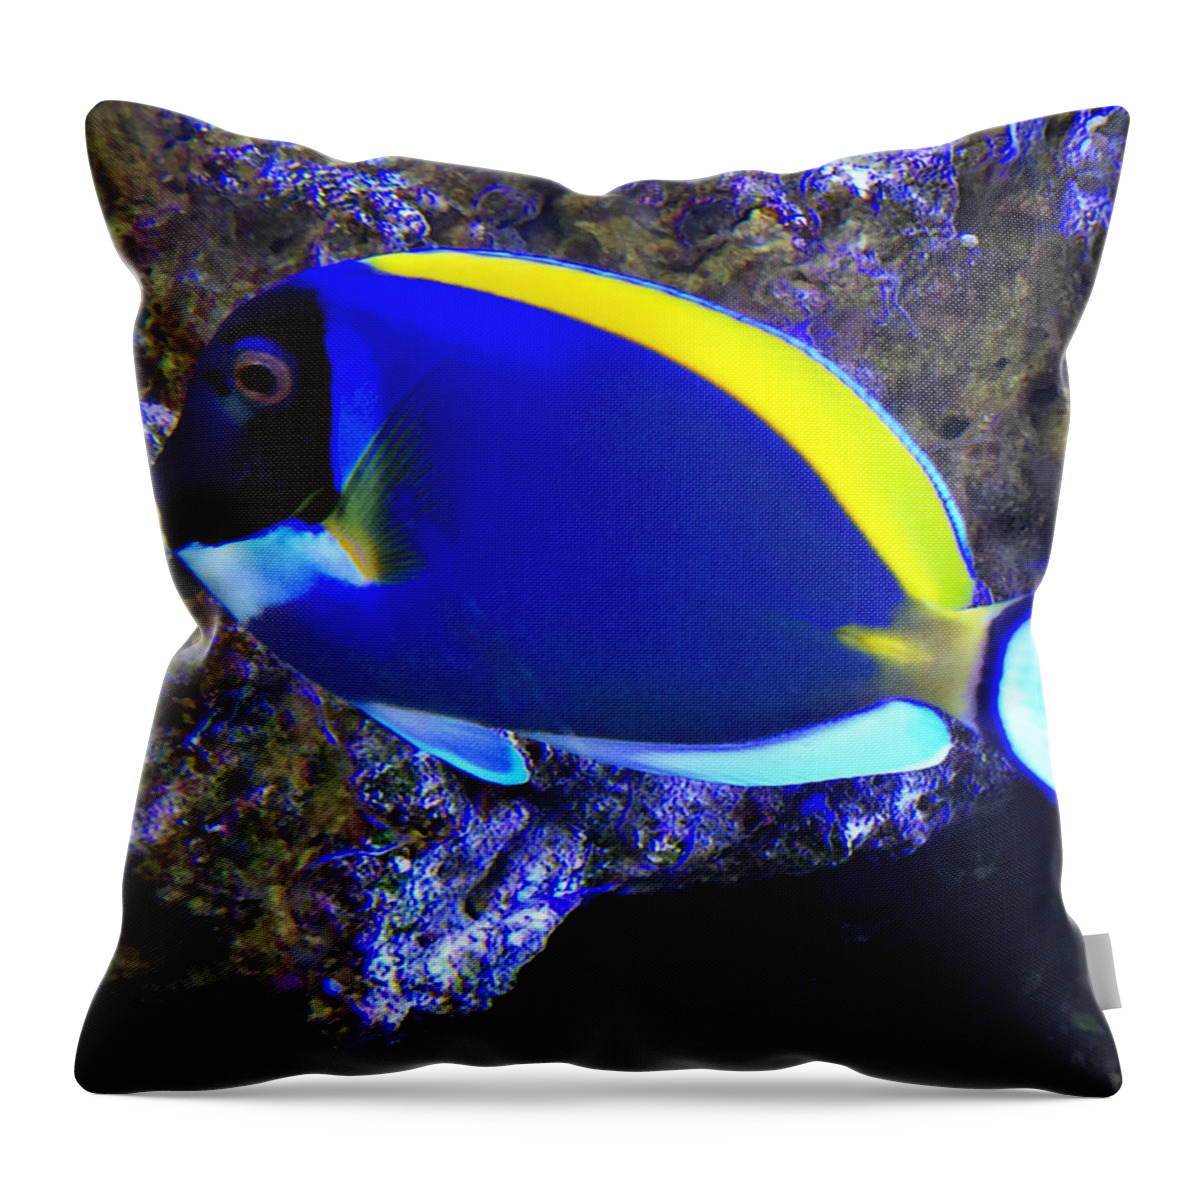 Blue Tang Fish Throw Pillow featuring the photograph Blue Tang Fish by Kathy M Krause